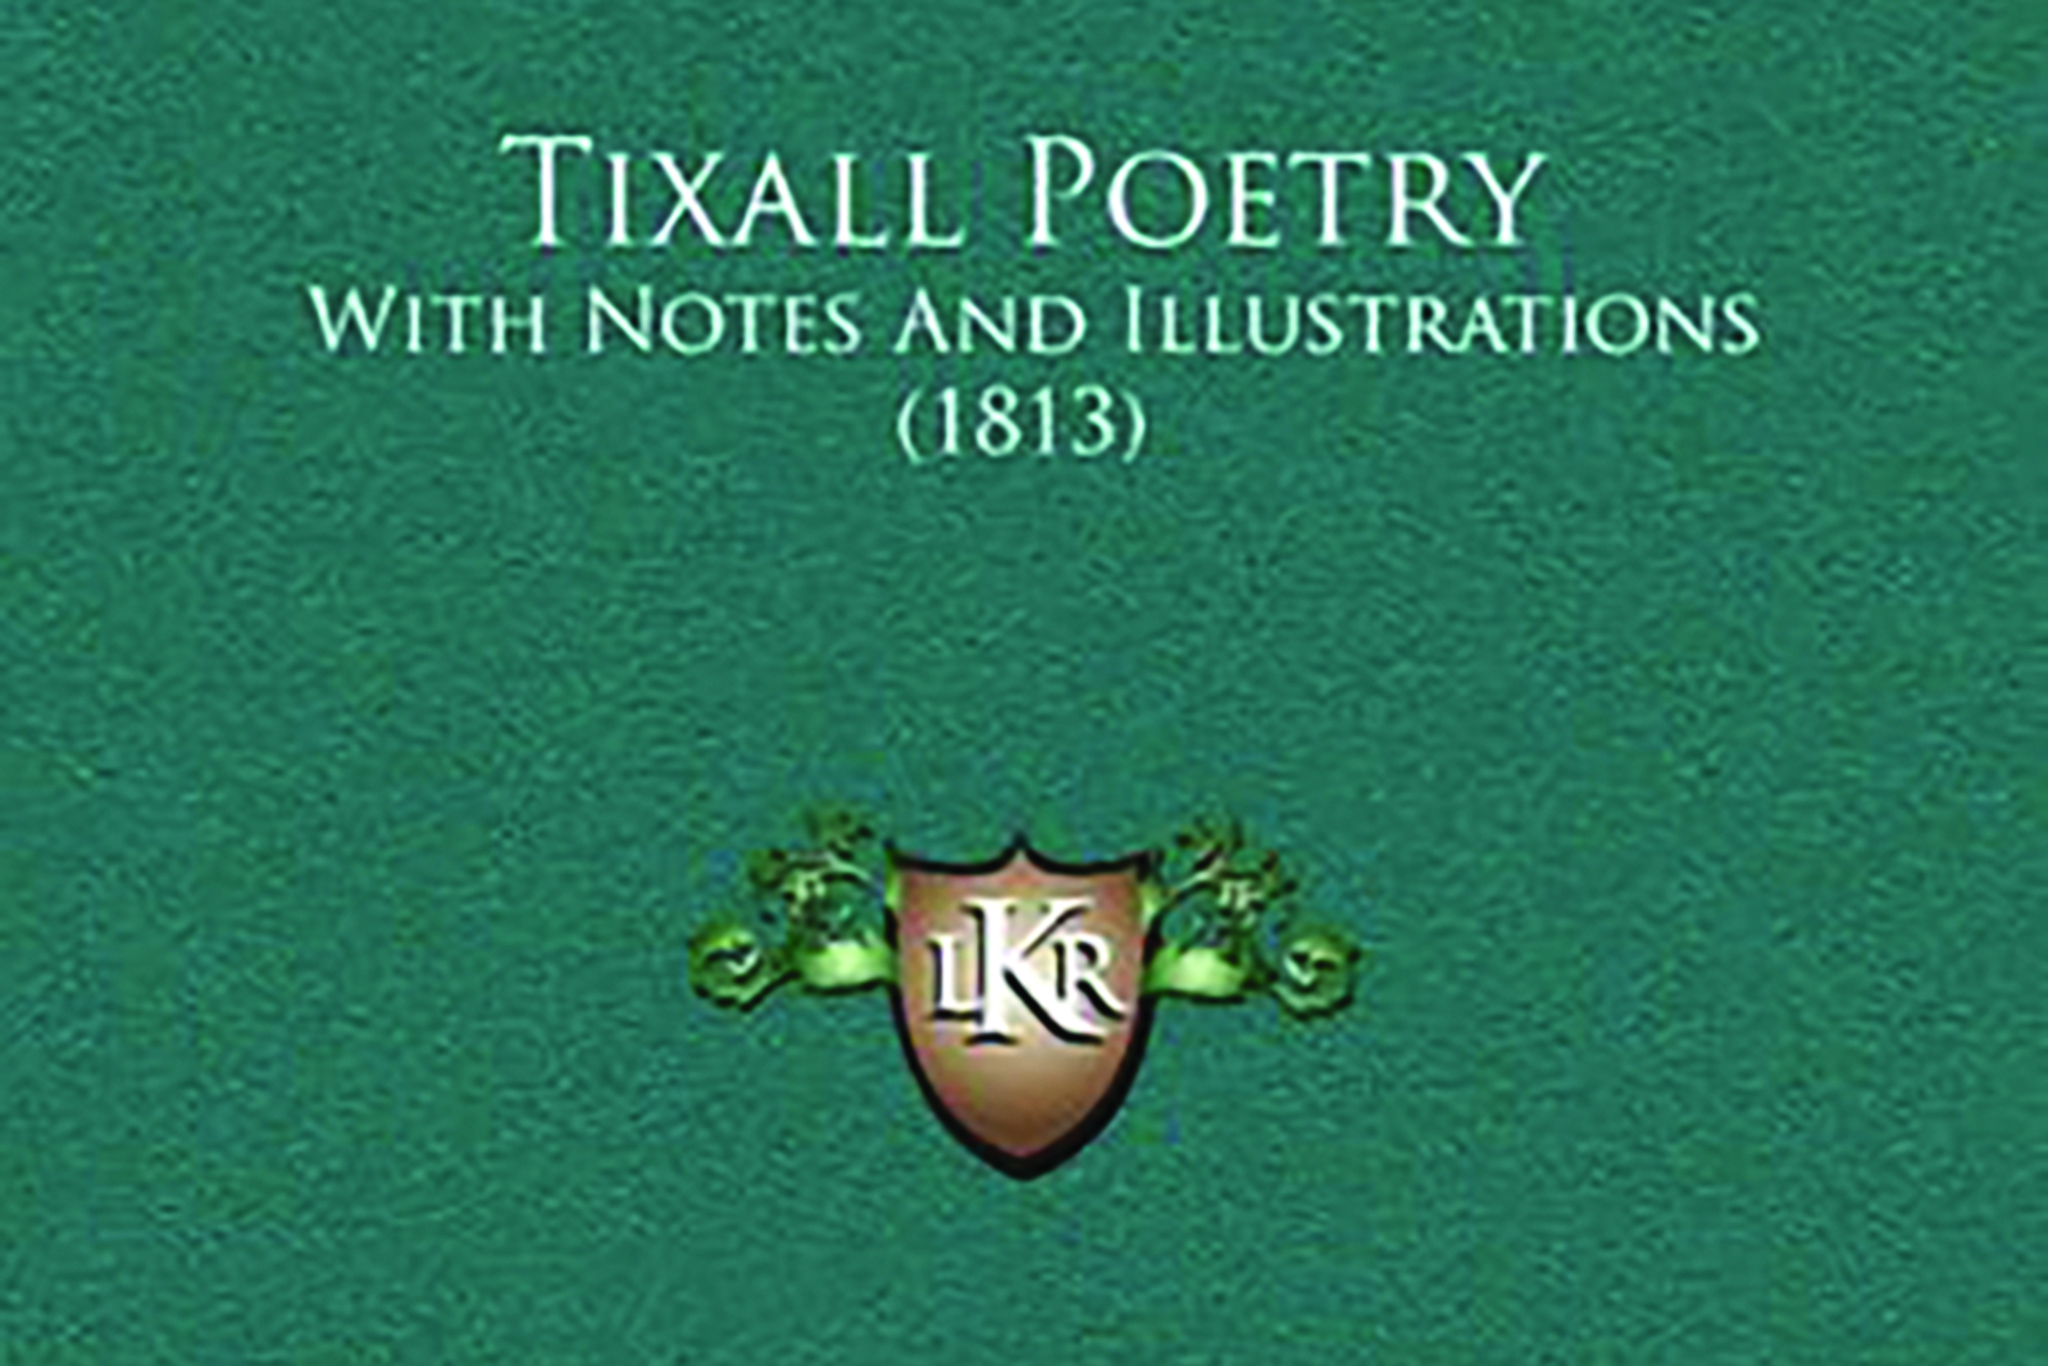 Arthur Clifford: unearthed the Tixall Letters and Tixall Poetry